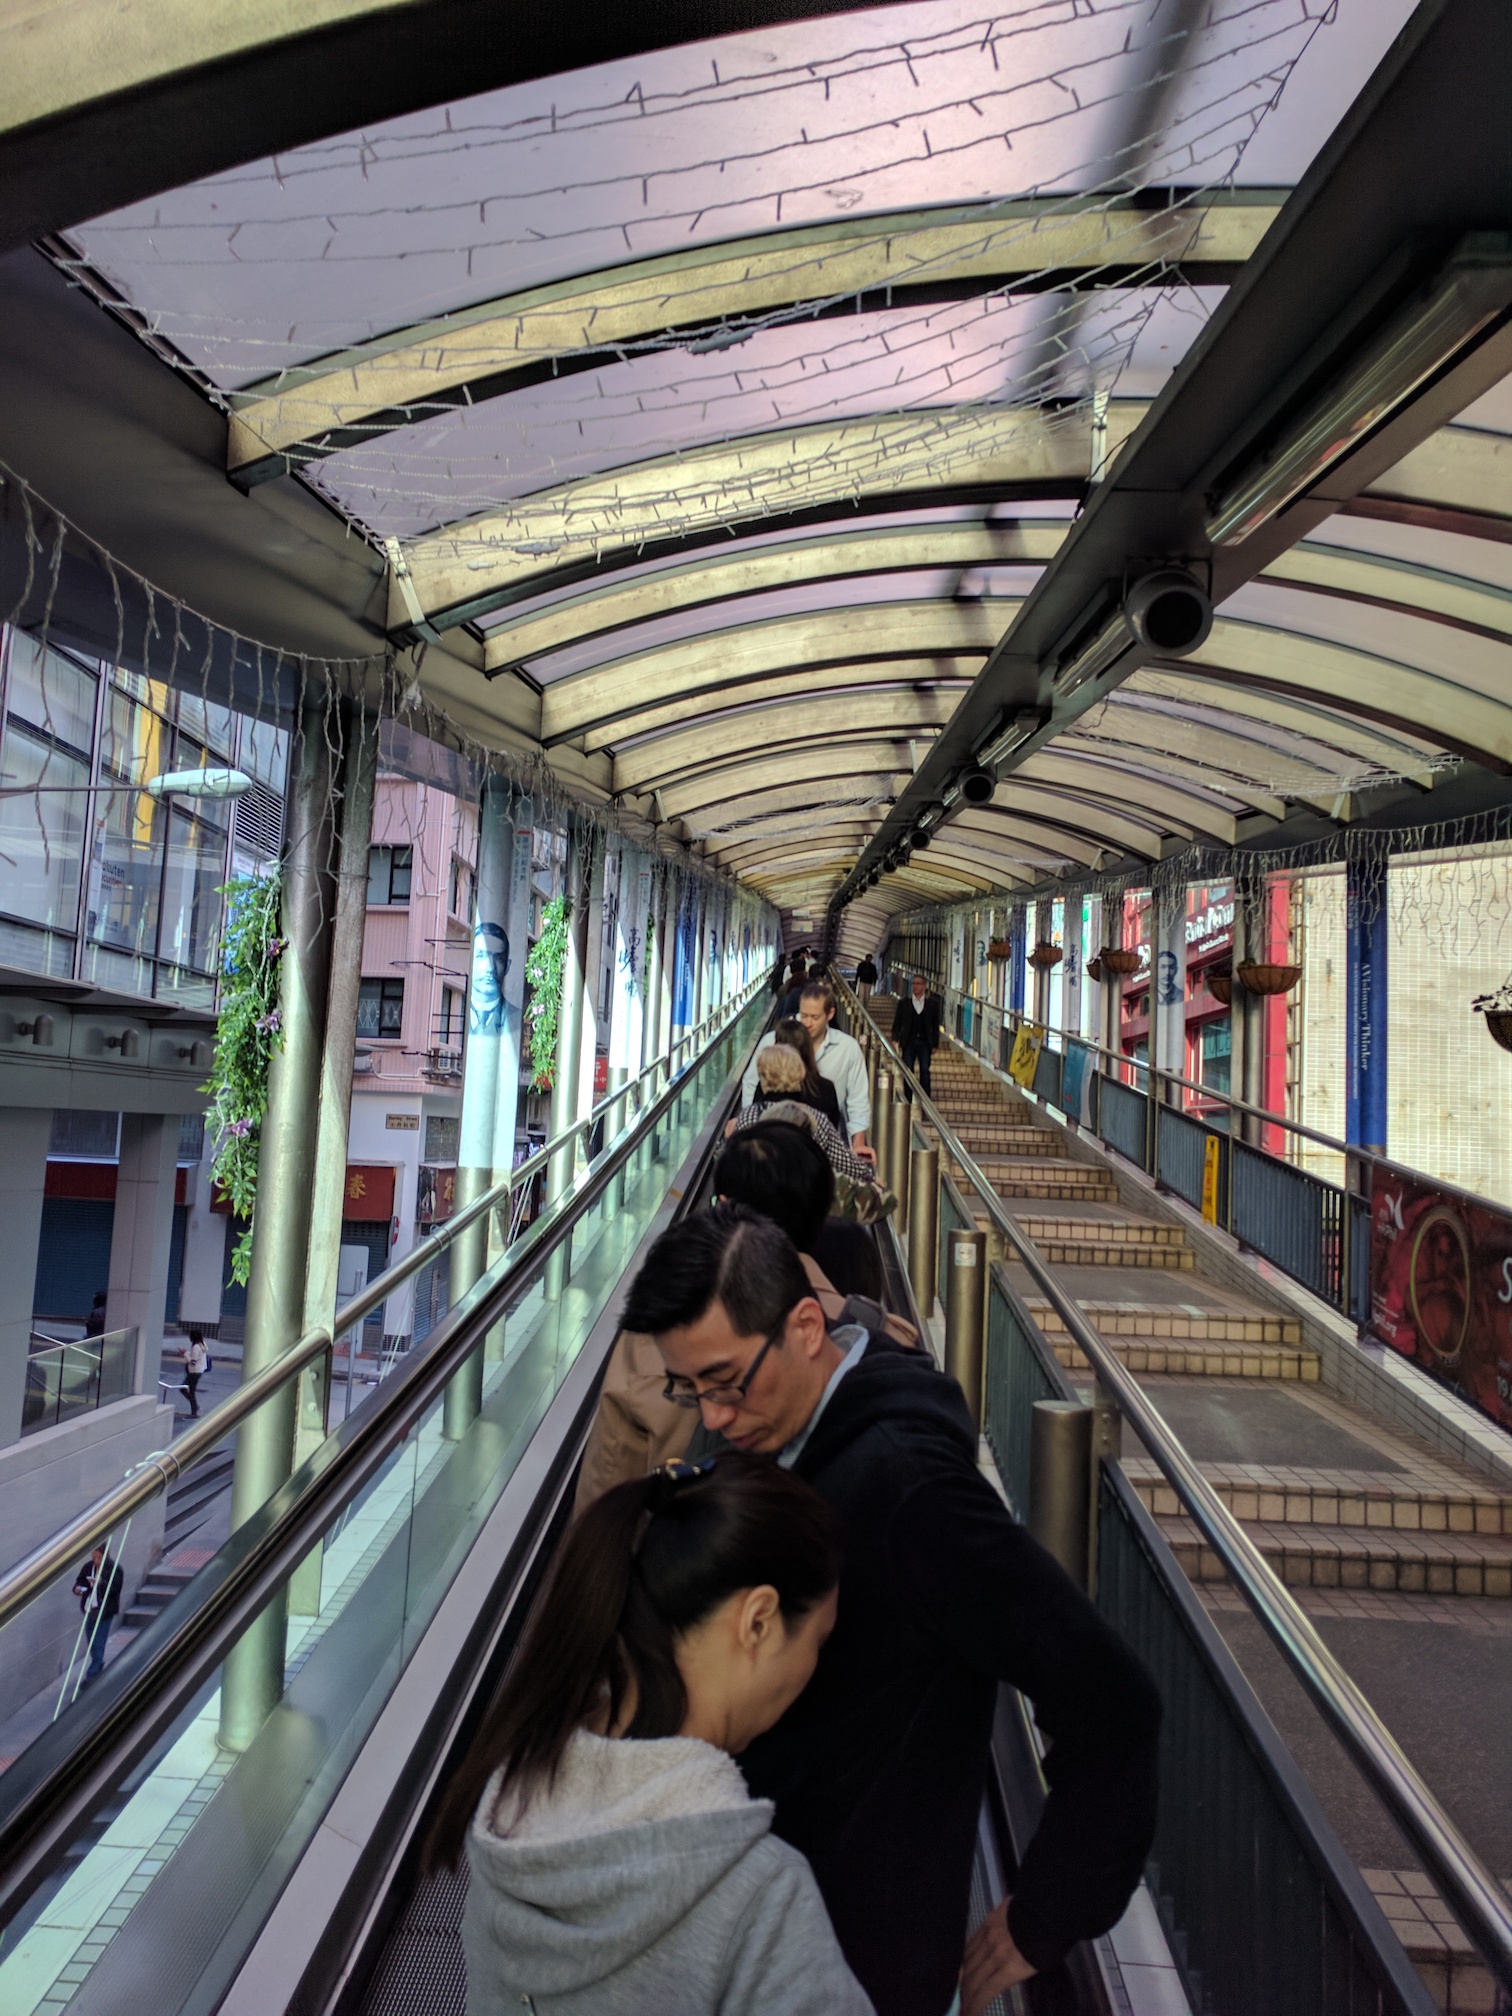 Hong Kong drives on the left, walks on the left, but stands on the right on escalators